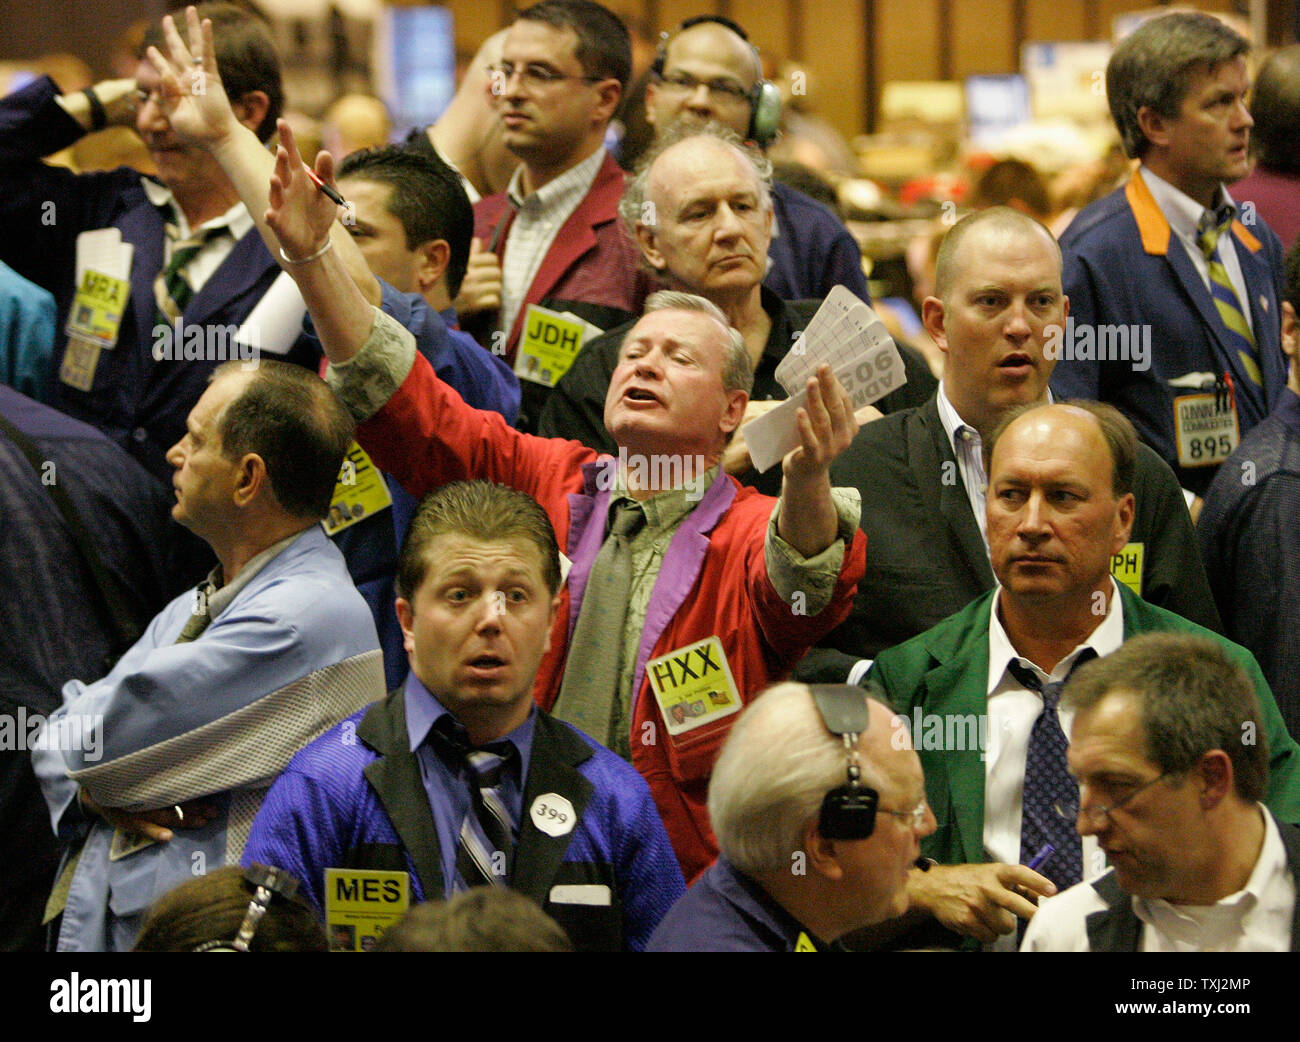 https://c8.alamy.com/comp/TXJ2MP/traders-work-in-the-corn-futures-pit-at-the-chicago-board-of-trade-in-chicago-on-march-30-2007-an-agriculture-report-released-friday-by-the-government-stated-that-us-farmers-hoping-to-cash-in-on-the-ethanol-boom-plan-to-devote-the-most-acreage-to-corn-since-1944-upi-photobrian-kersey-TXJ2MP.jpg